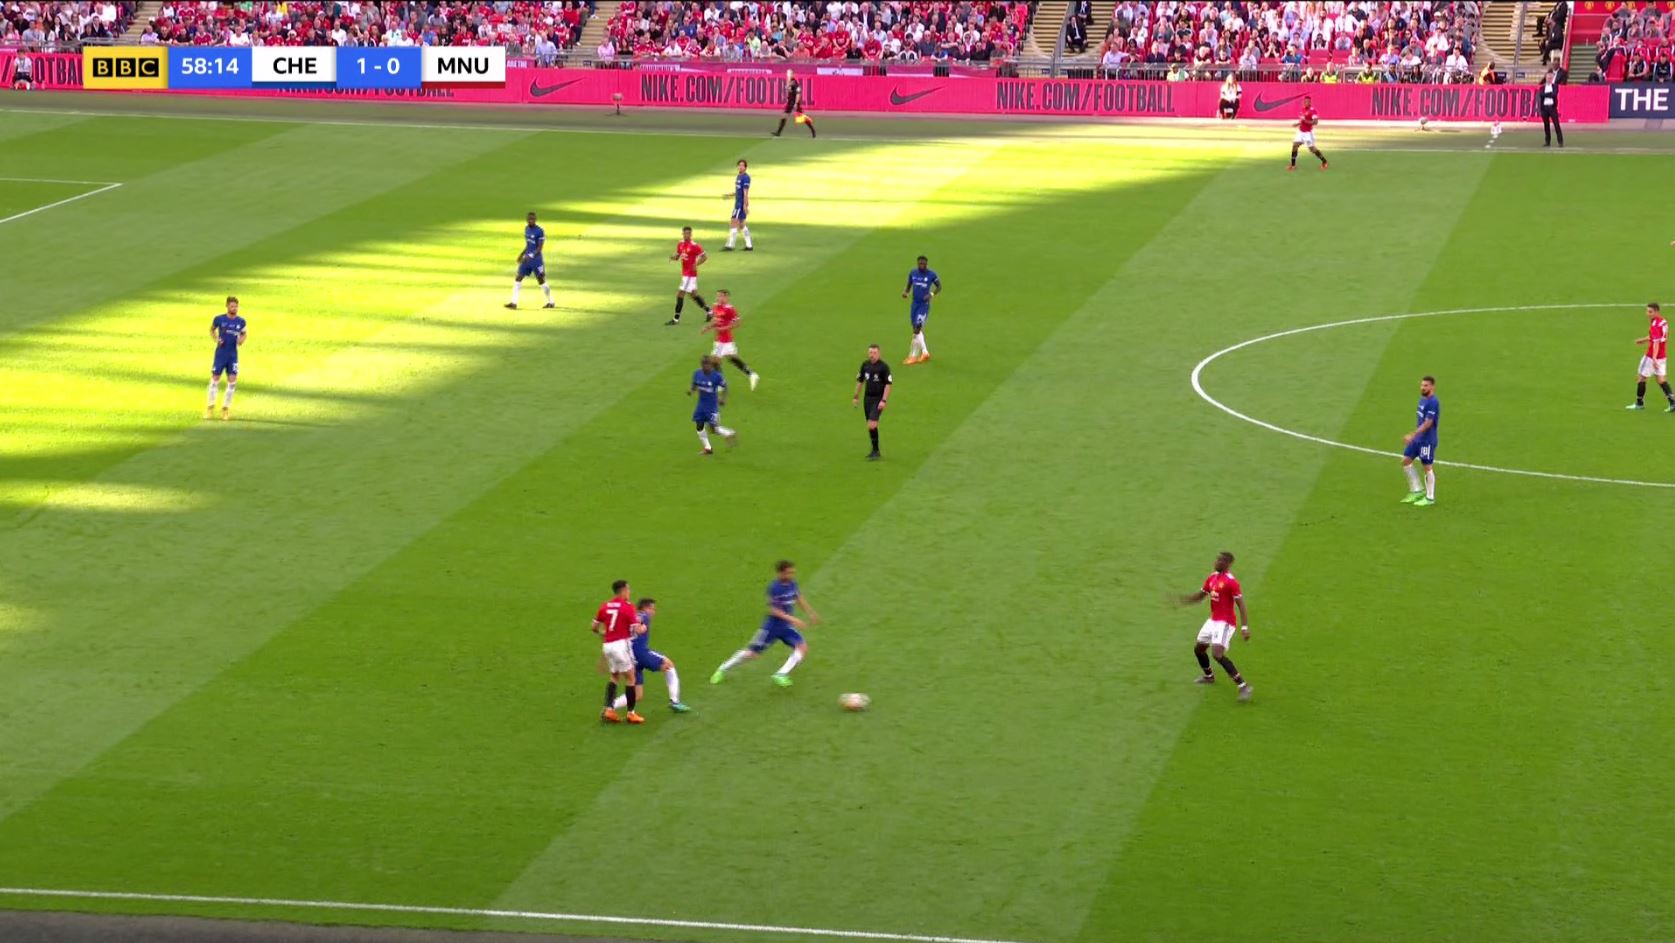 Sanchez was quickly closed down by Cesar Azpilicueta and botched his return pass. (BBC)